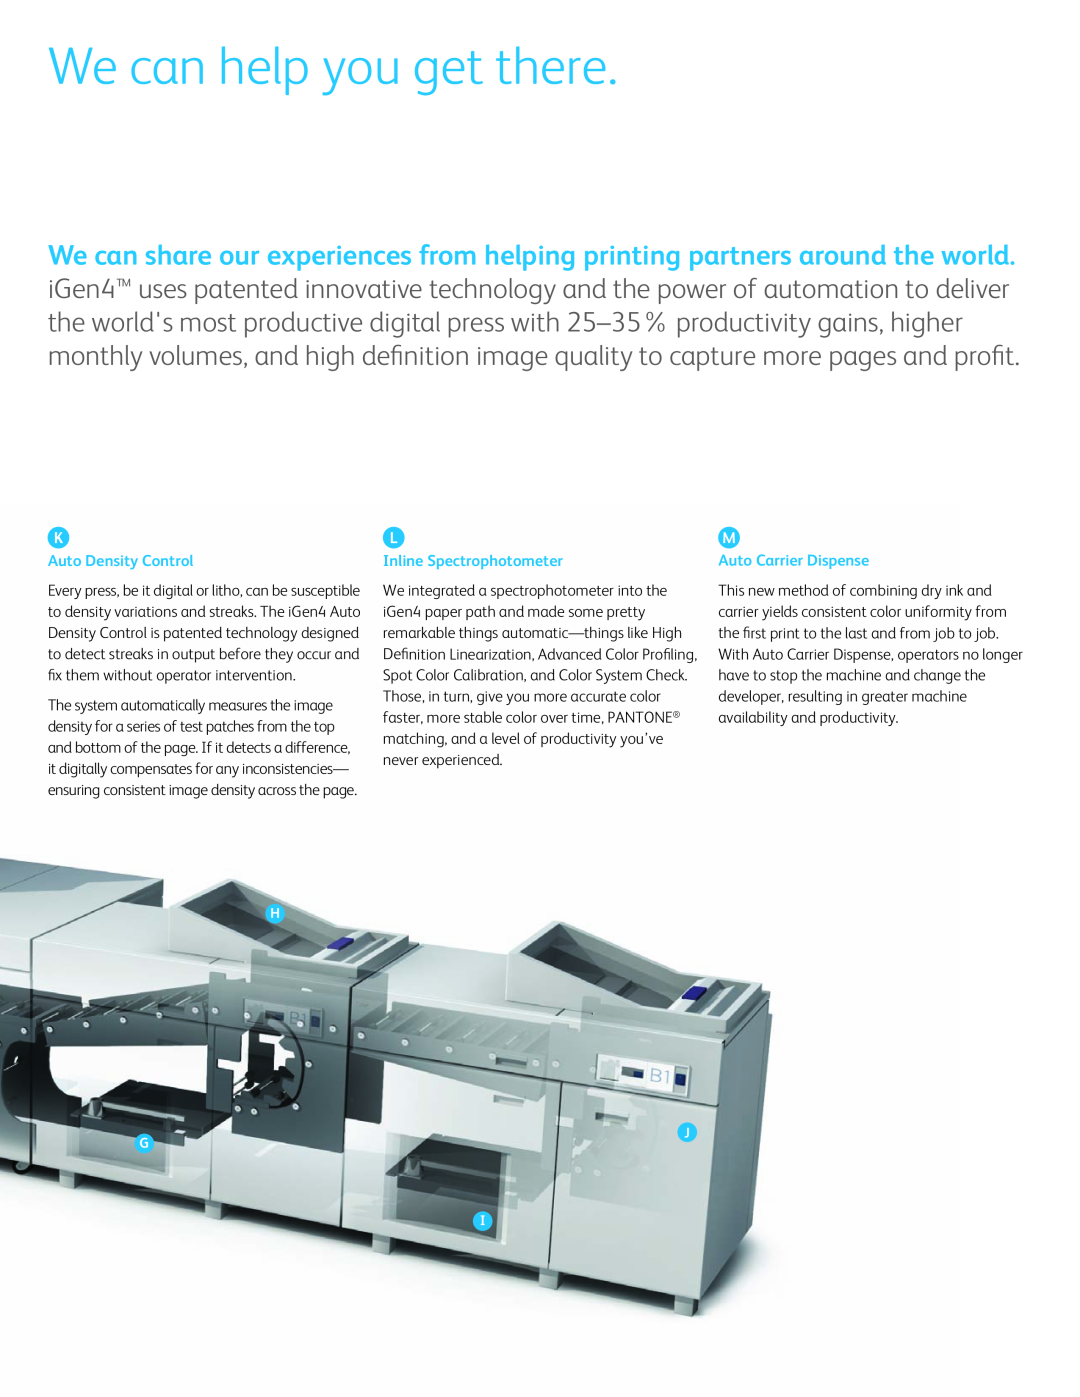 Xerox iGen3, iGen4 manual We can help you get there, Auto Density Control, Inline Spectrophotometer, Auto Carrier Dispense 